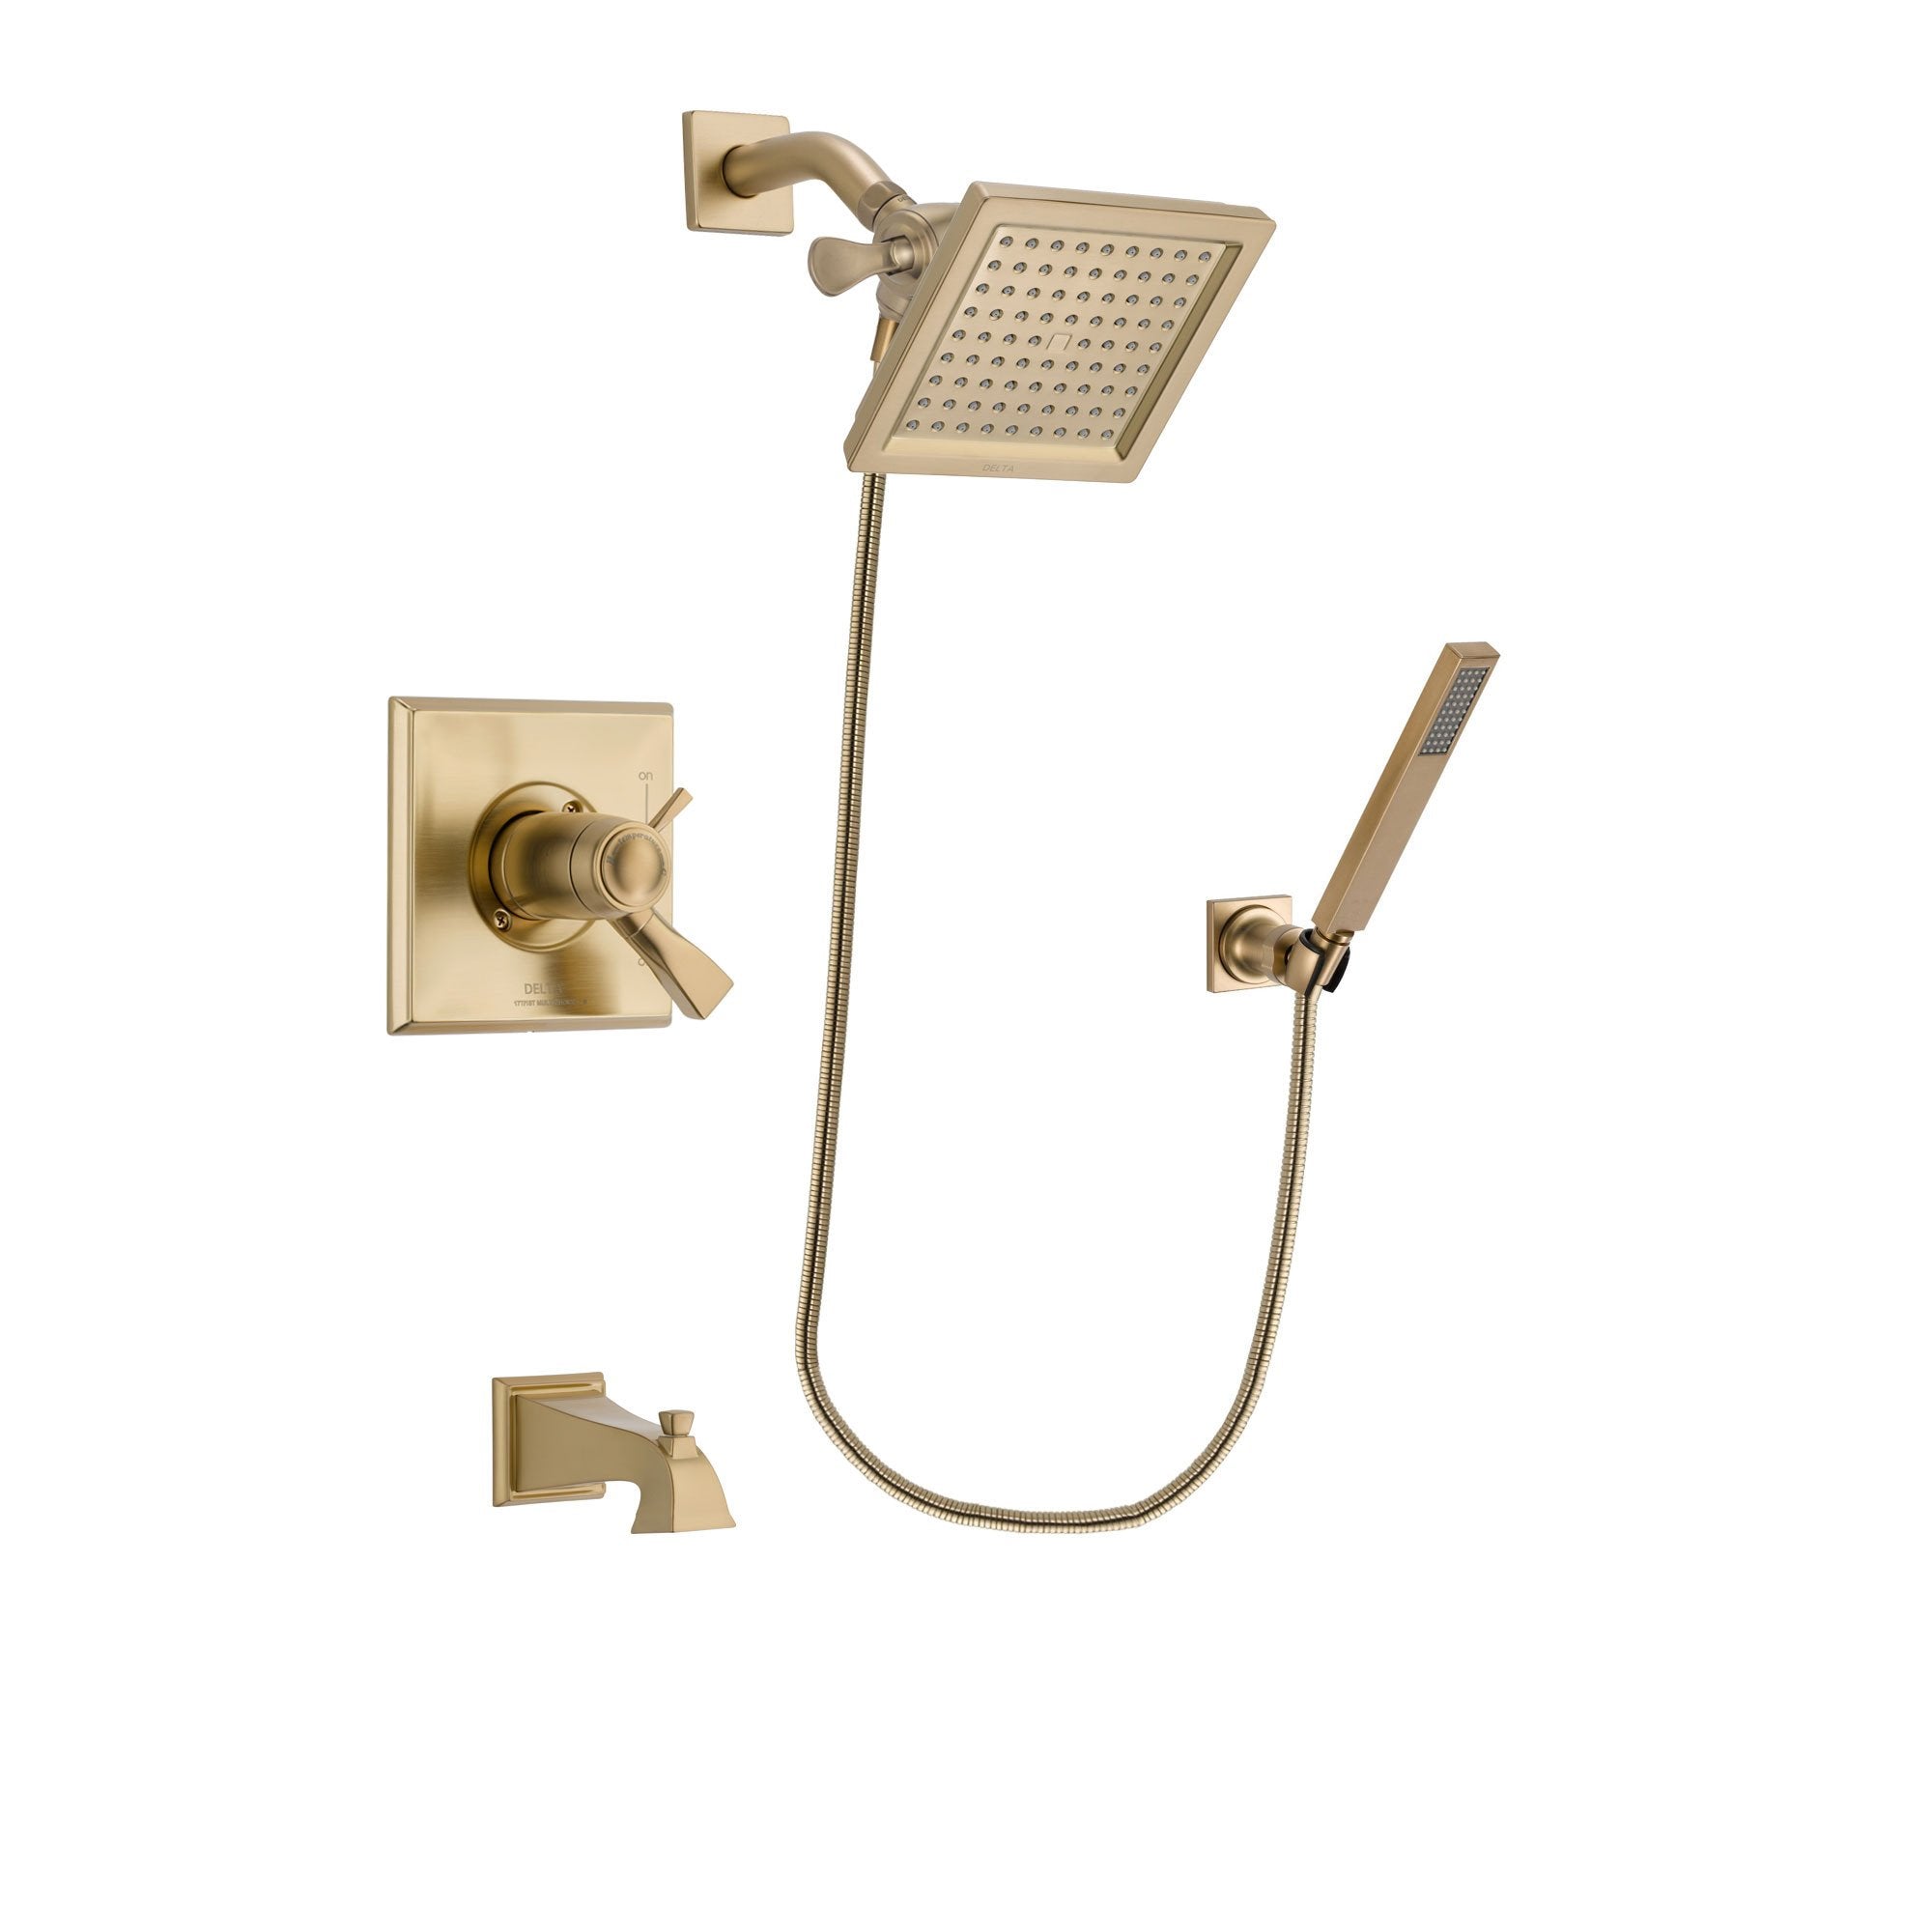 Delta Dryden Champagne Bronze Finish Thermostatic Tub and Shower Faucet System Package with 6.5-inch Square Rain Showerhead and Modern Wall-Mount Handheld Shower Stick Includes Rough-in Valve and Tub Spout DSP3885V